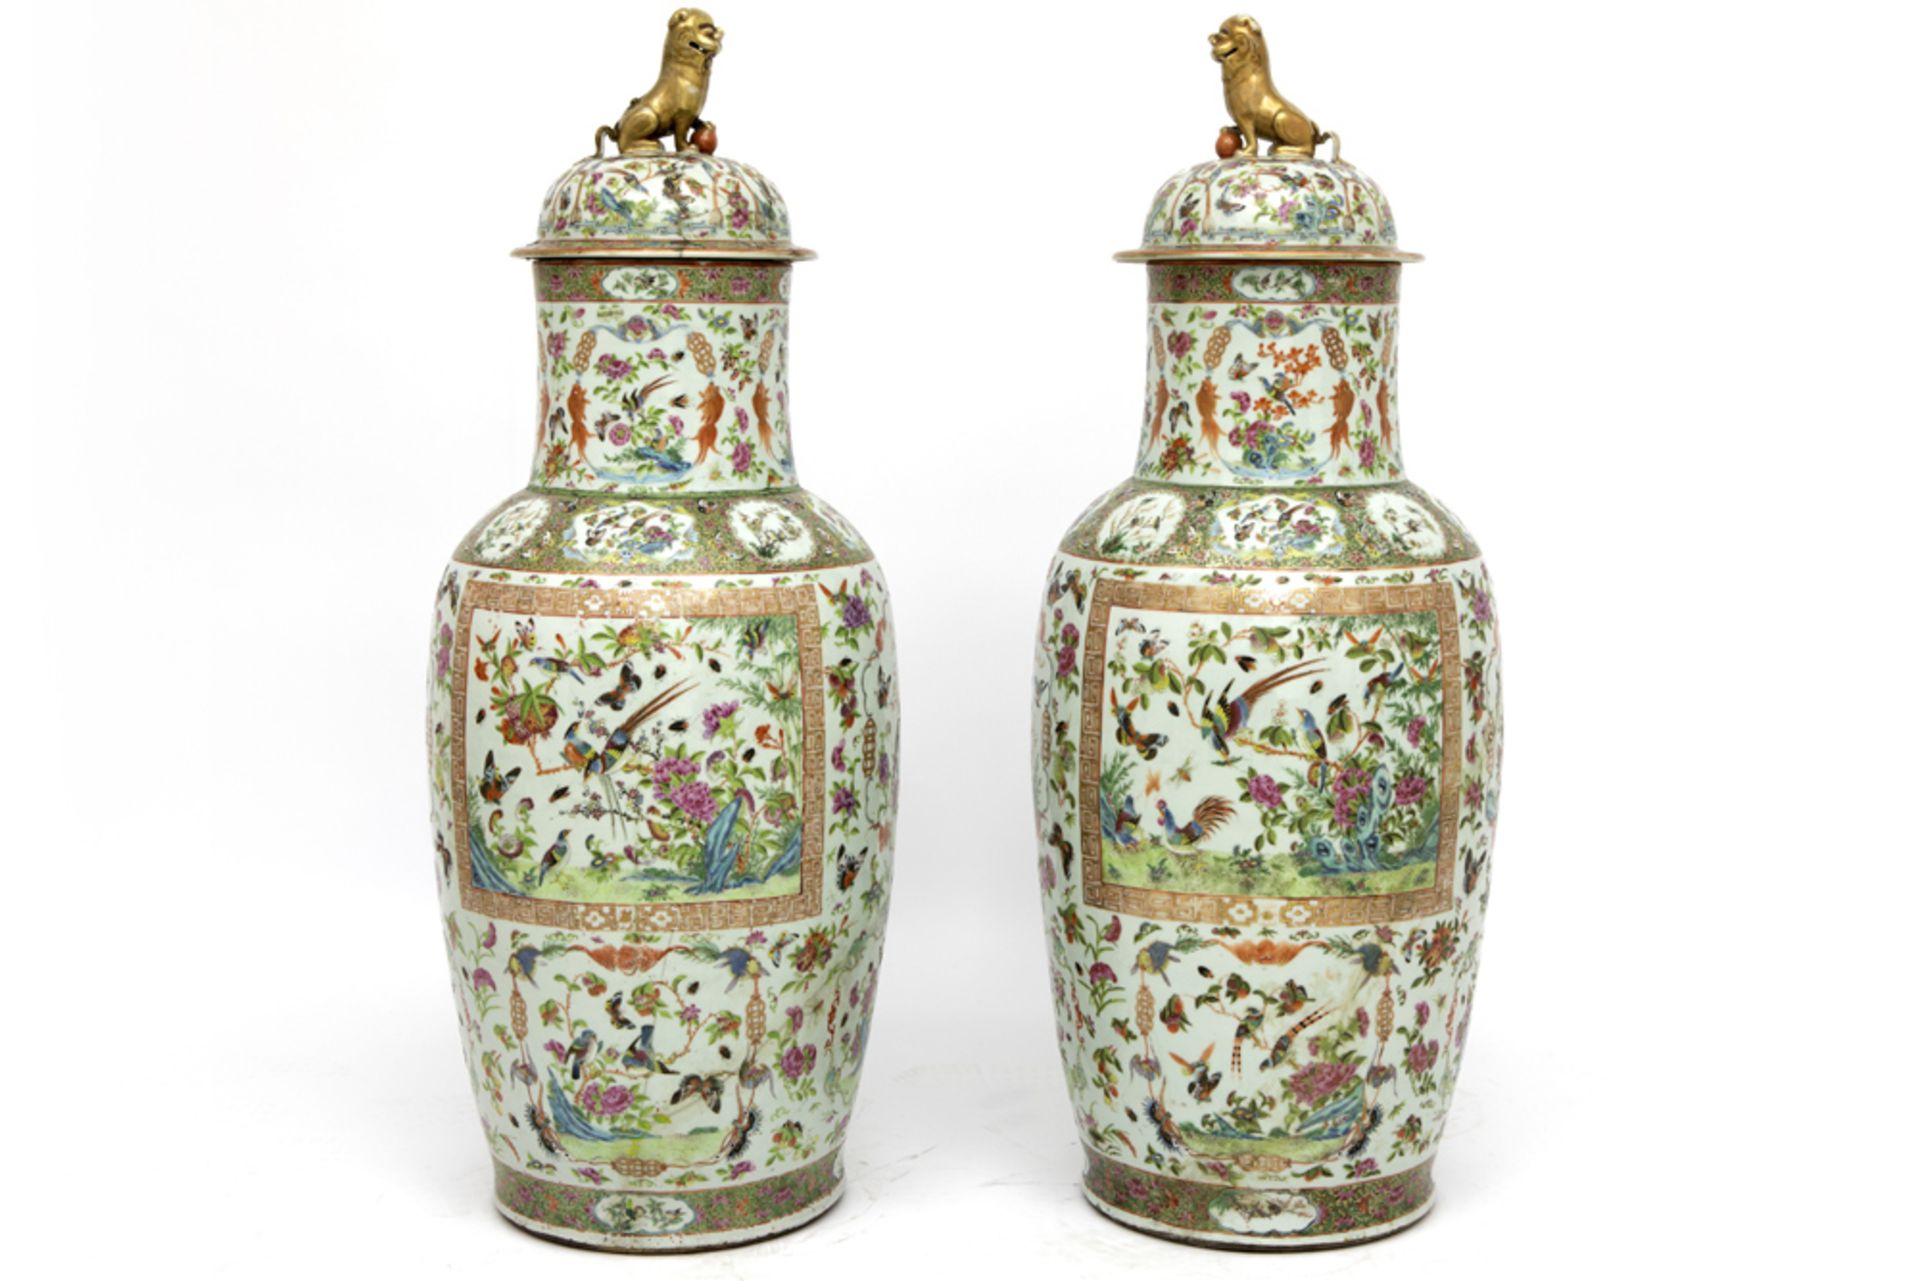 pair of quite big 19th Cent. Chinese lidded vases in porcelain with a Cantonese decor were damaged